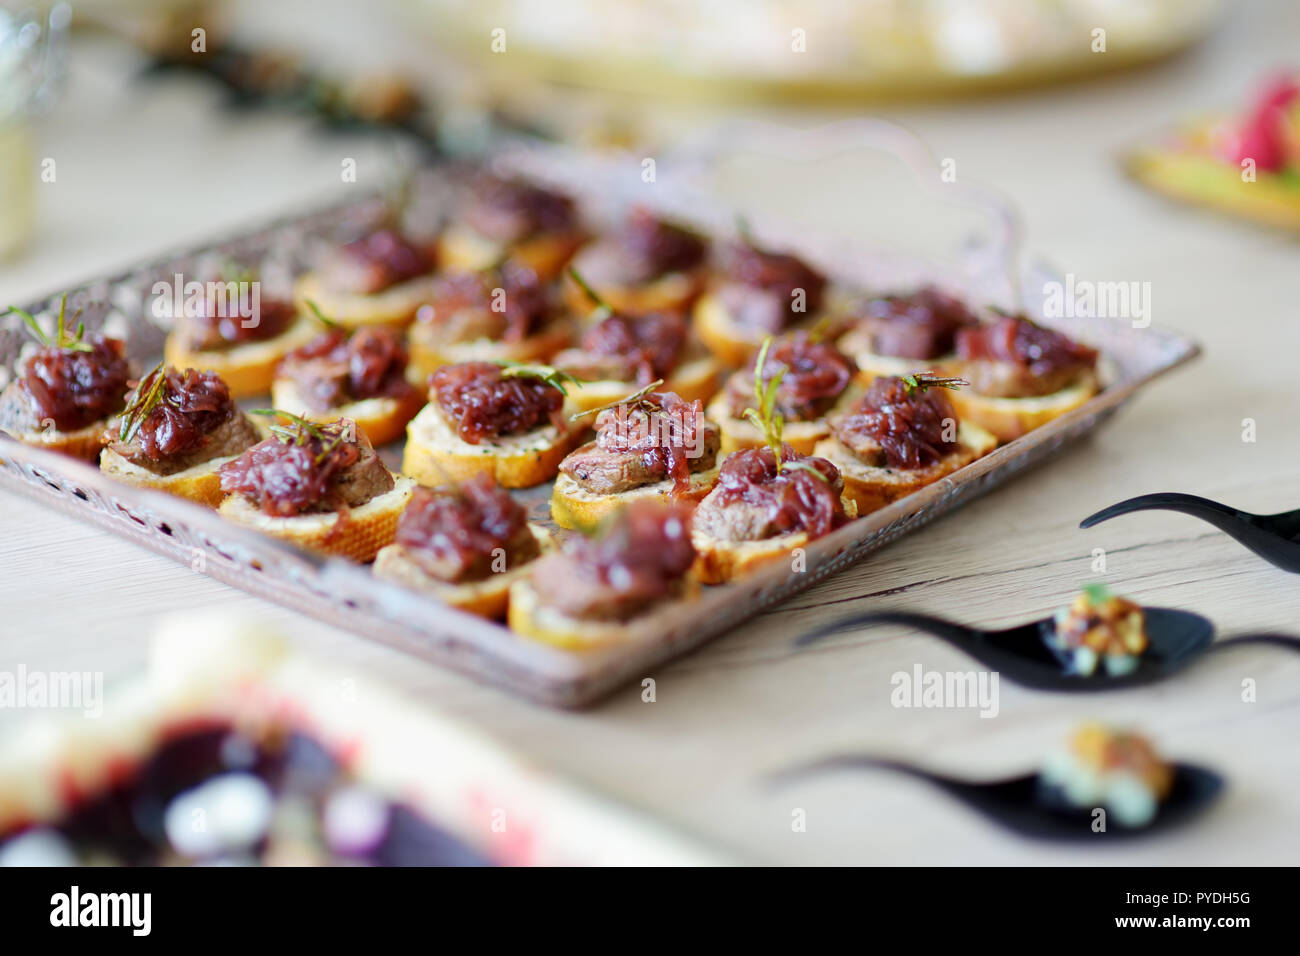 Delicious Pate Snacks With Beet Topping Served On A Party Or Wedding